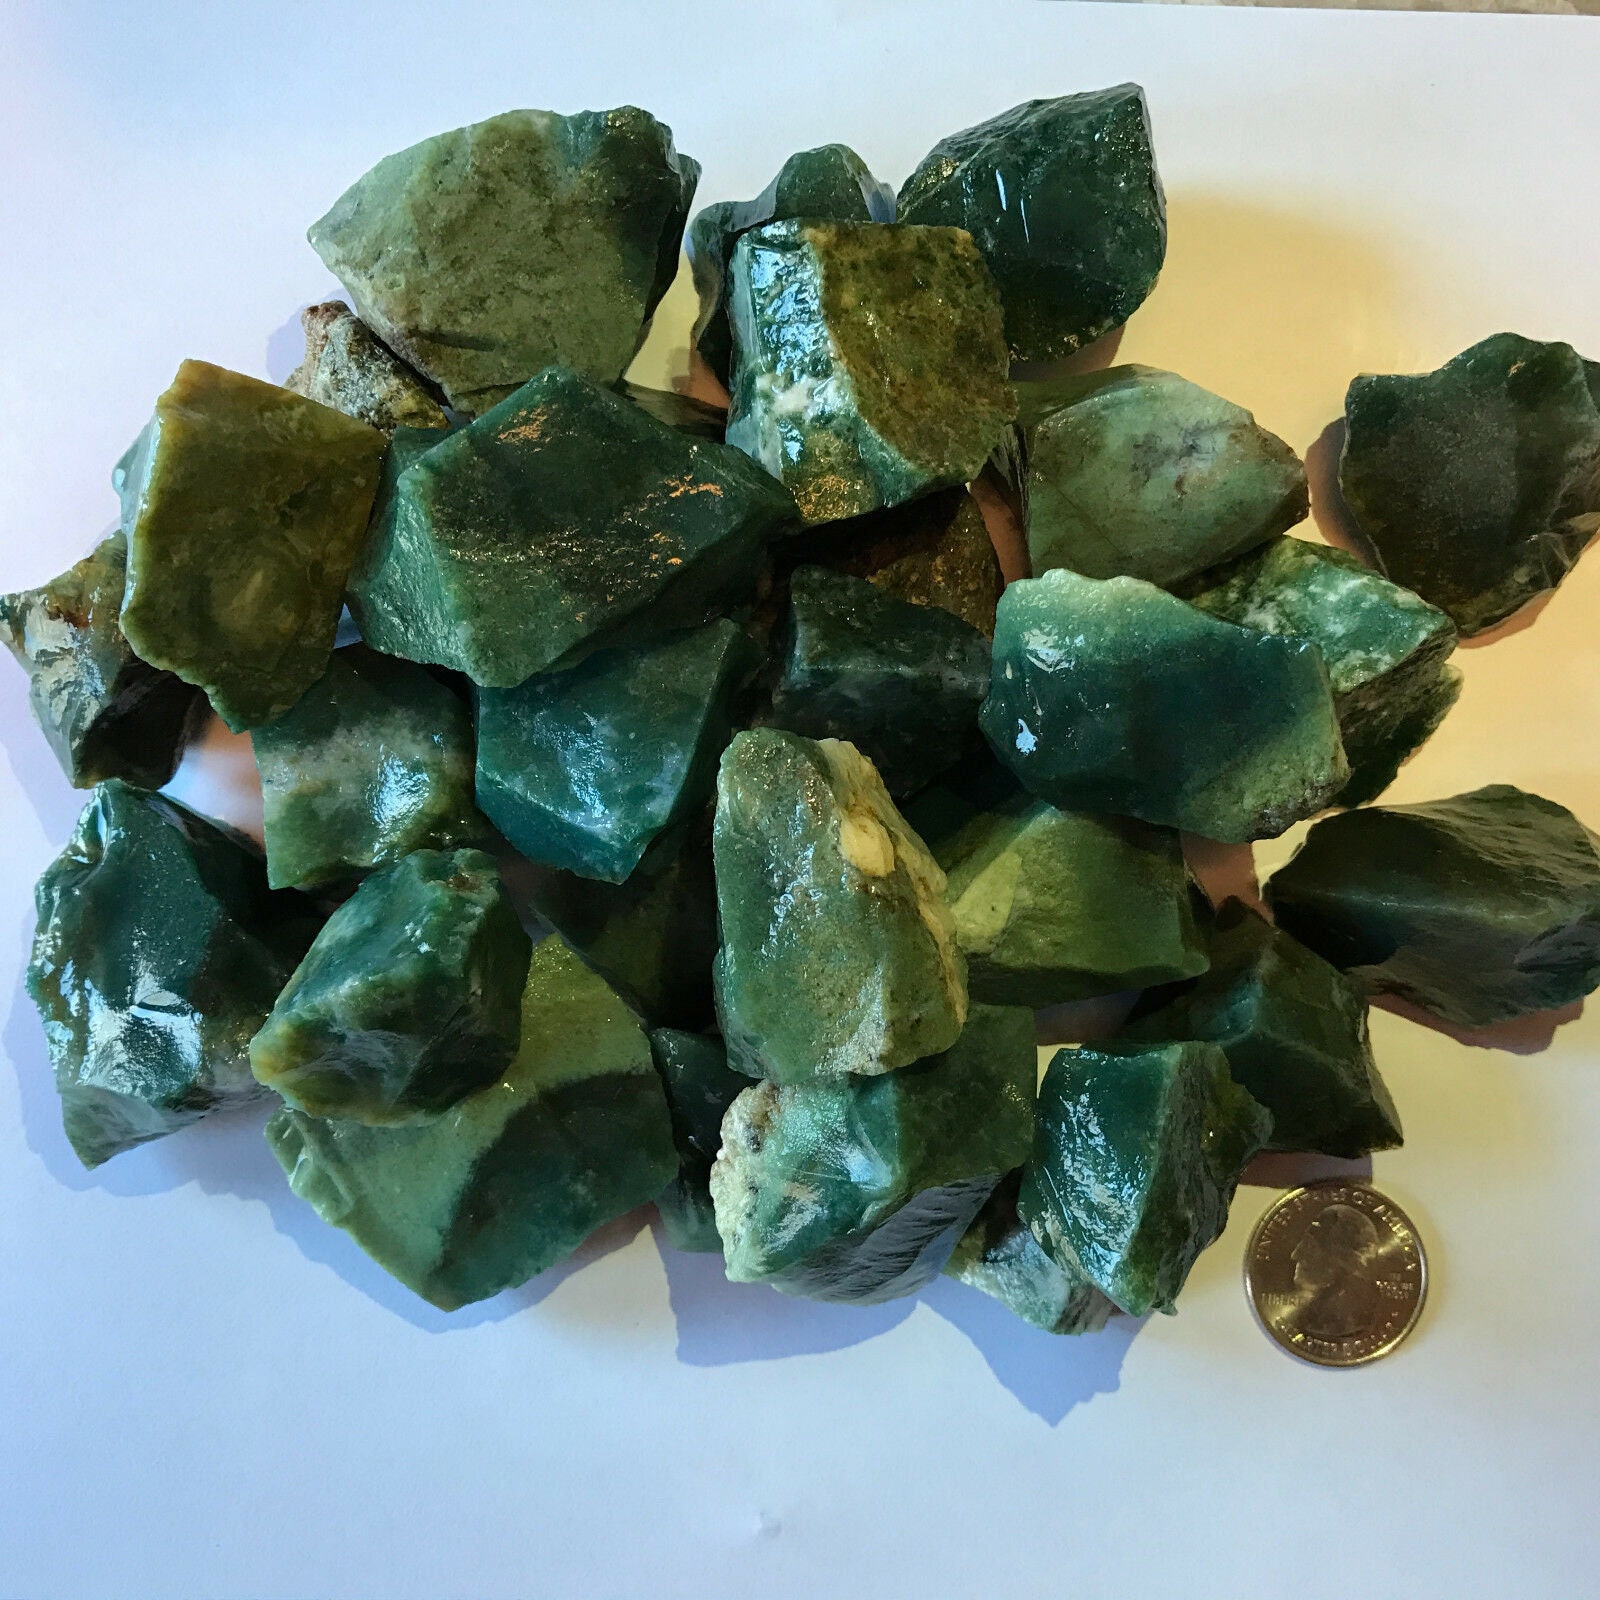 Winter Sale!! 2000 Carat Lots of Green Jasper Rough + a Free Faceted  Gemstone